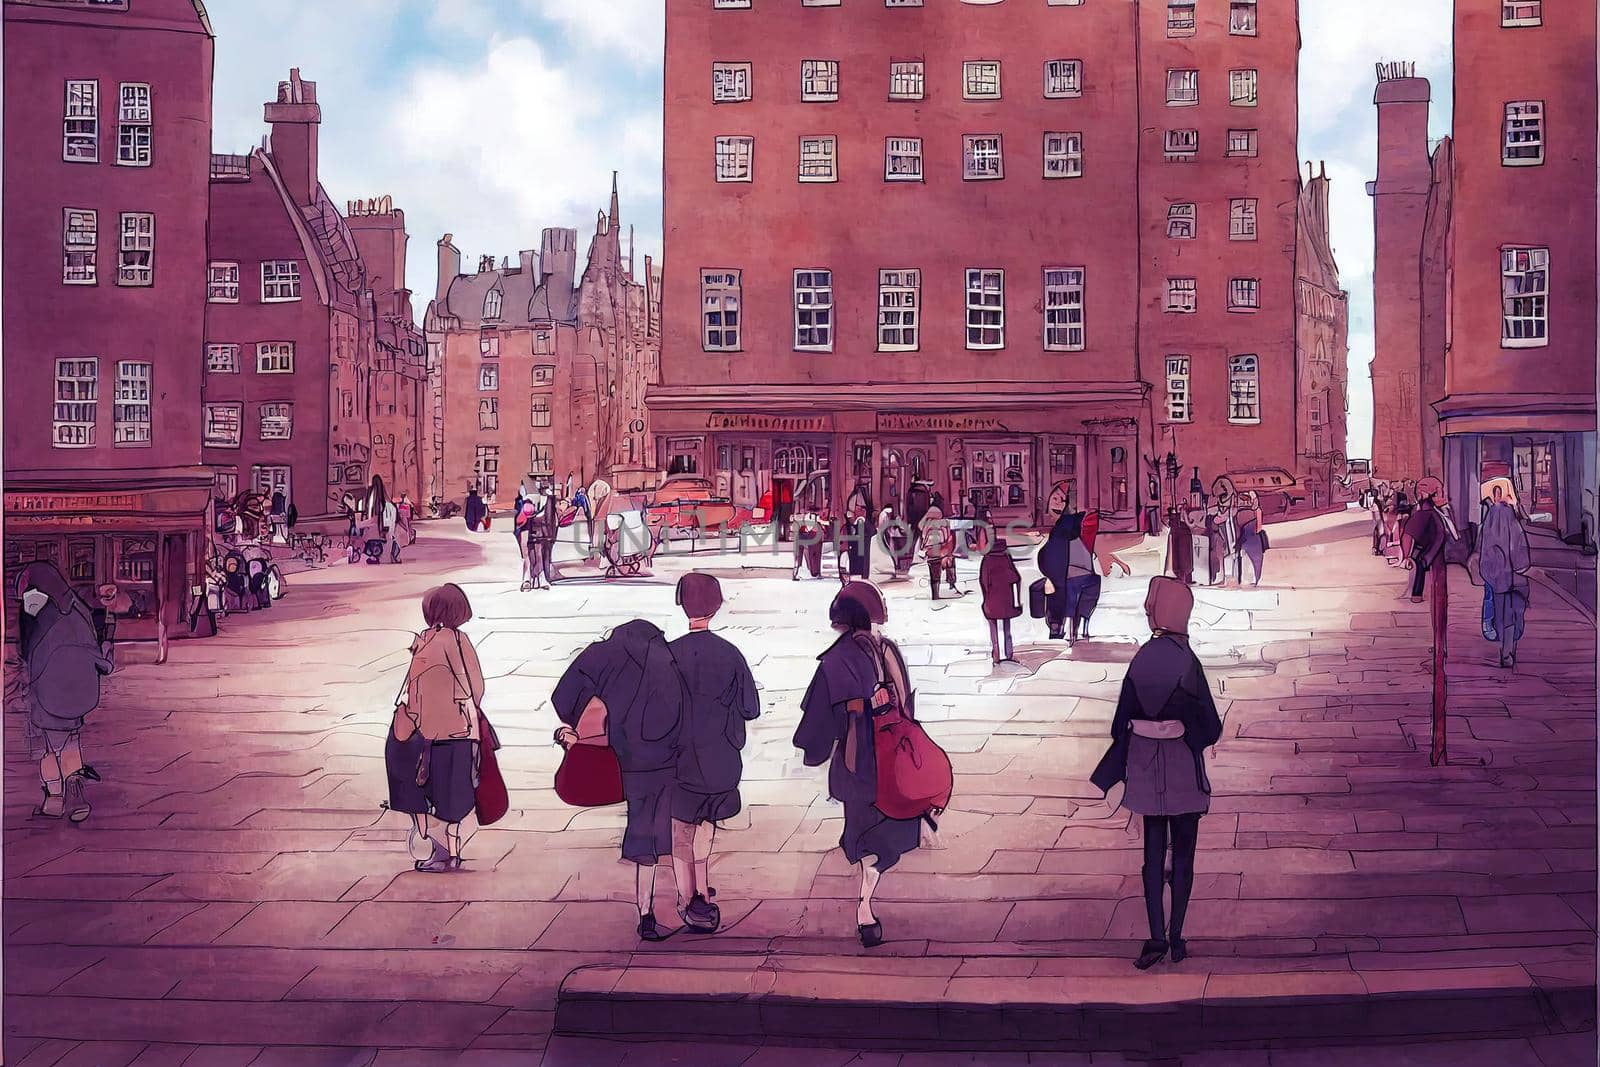 cartoon drawing Tourists walking around the capital city This is a famous landmark Edinurgh city centre scotland Uk th 2 , Anime style no watermark